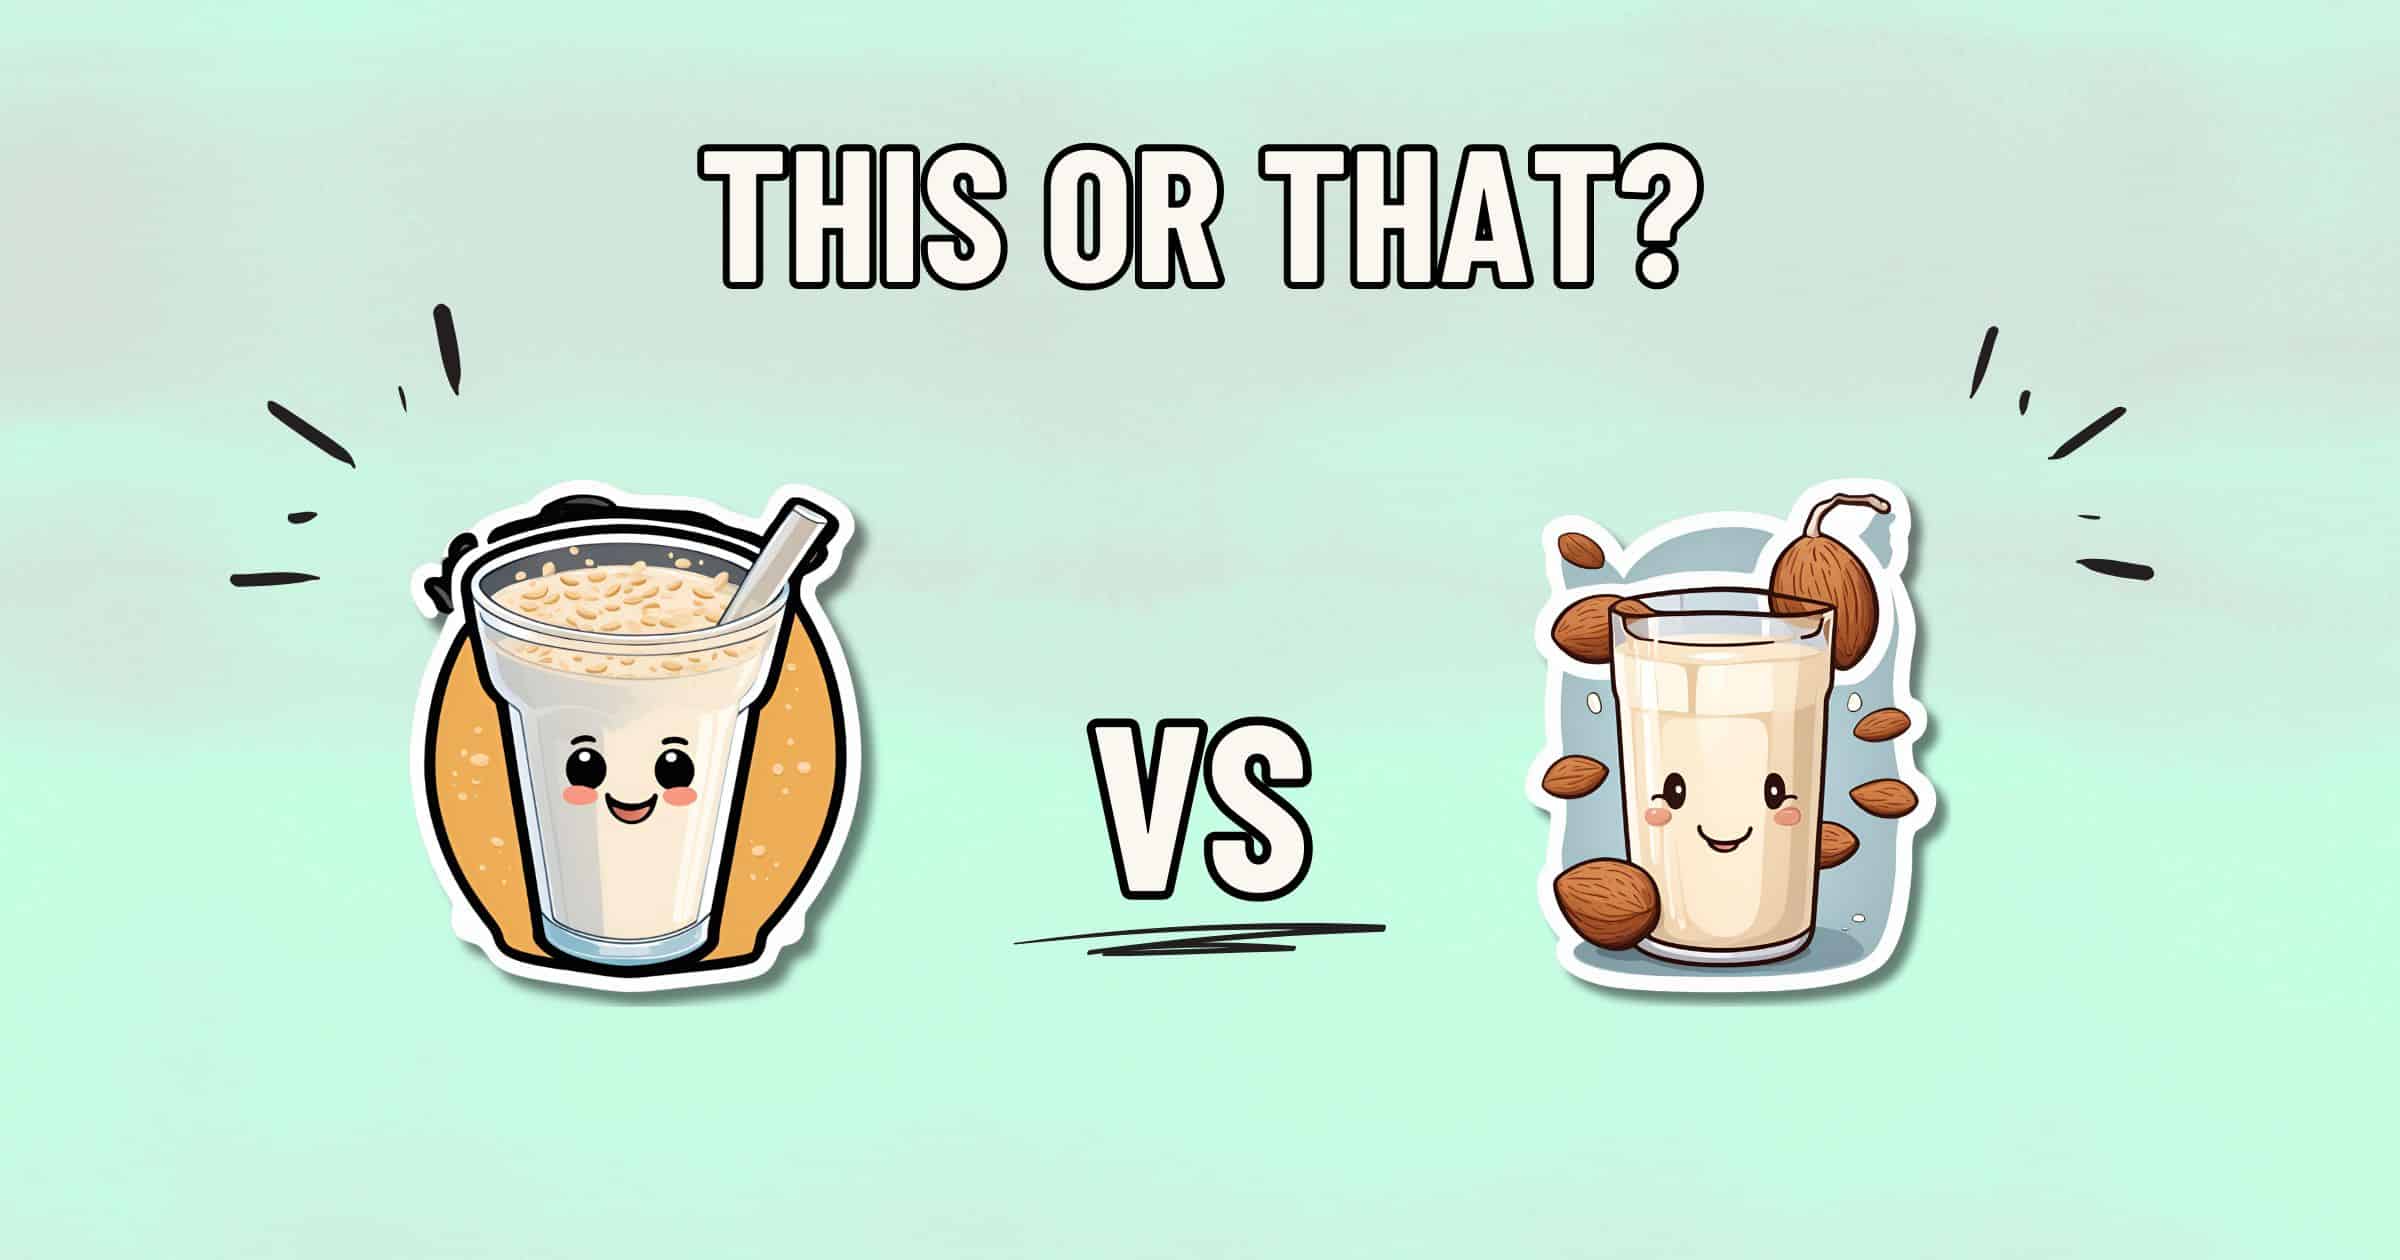 A comparison image showing two drinks. On the left, a glass of milk tea with tapioca pearls is depicted with a cheerful face. On the right, a glass of almond milk surrounded by almonds is also depicted with a cheerful face. The text reads "This or That? Healthier Choice: VS".